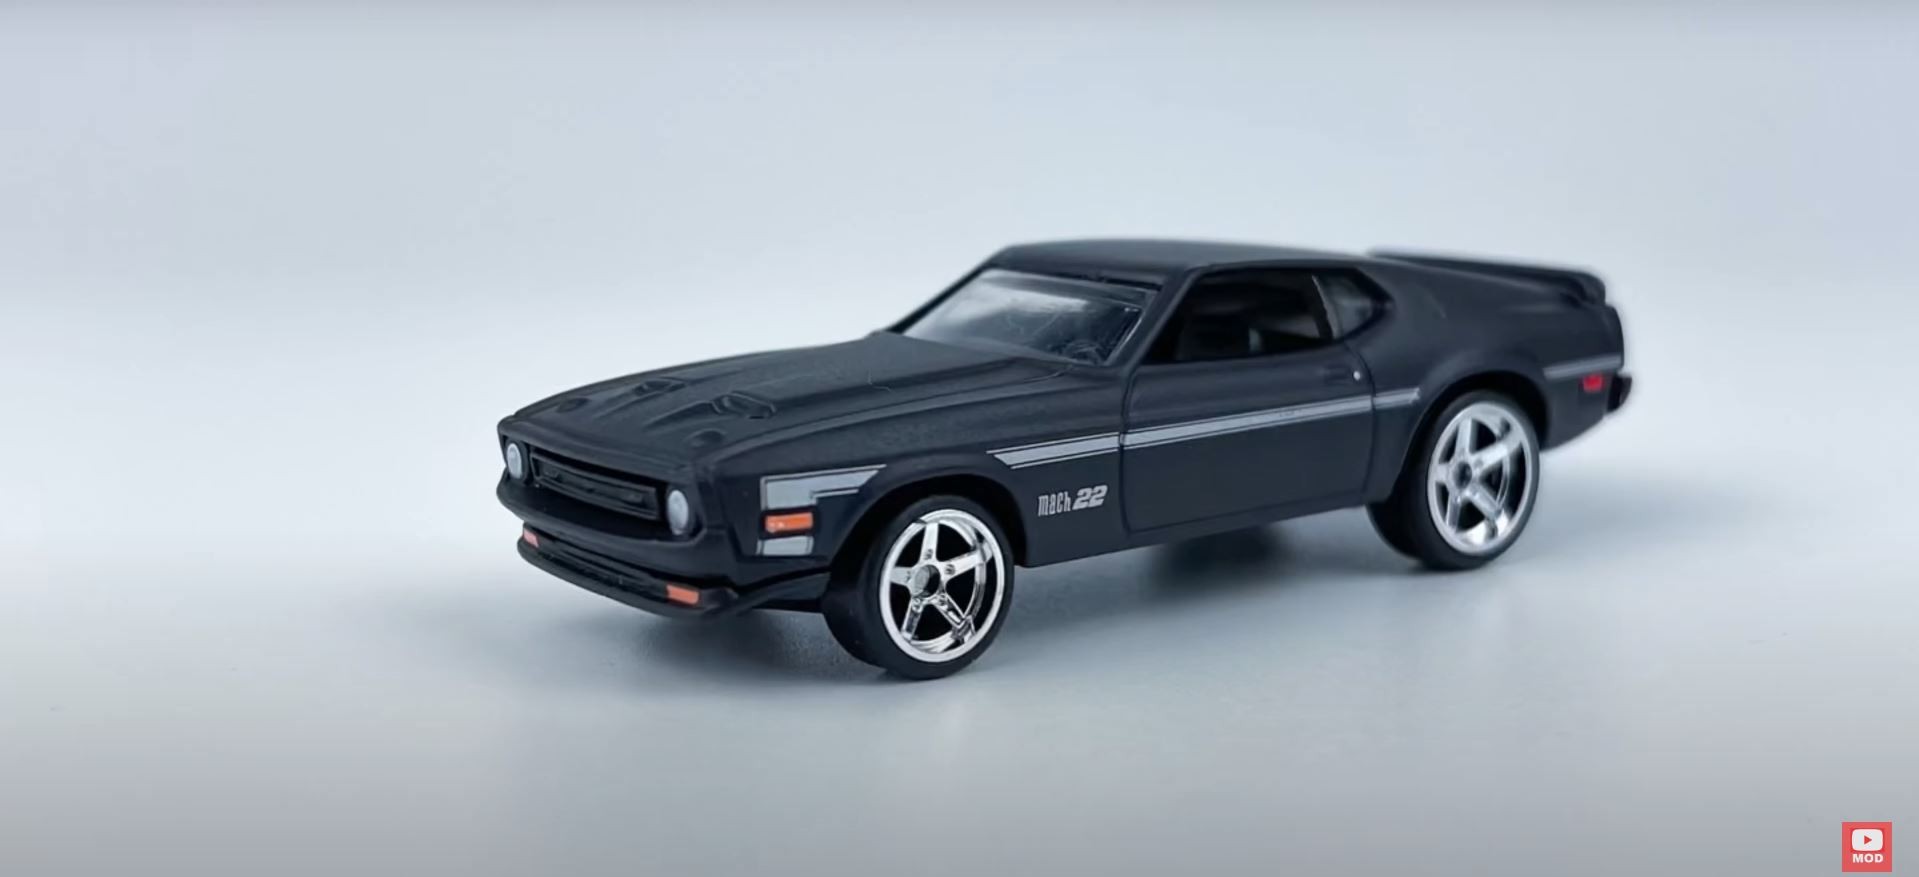 Inside The 2022 Hot Wheels Boulevard Set 1971 Ford Mustang Mach 1 Is